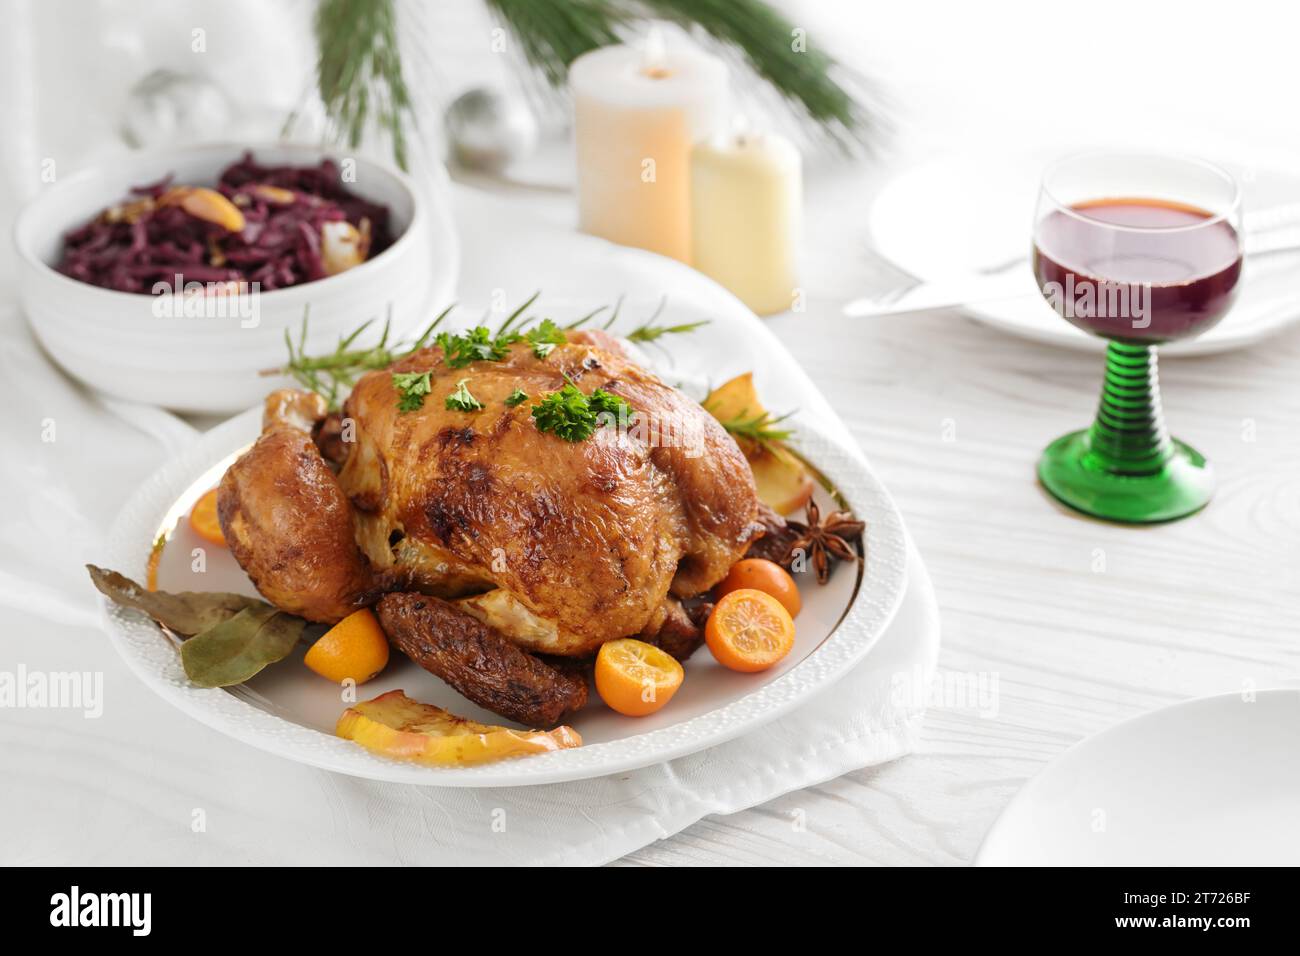 Festive poultry dinner, roast chicken with fruits and herbs, served ...